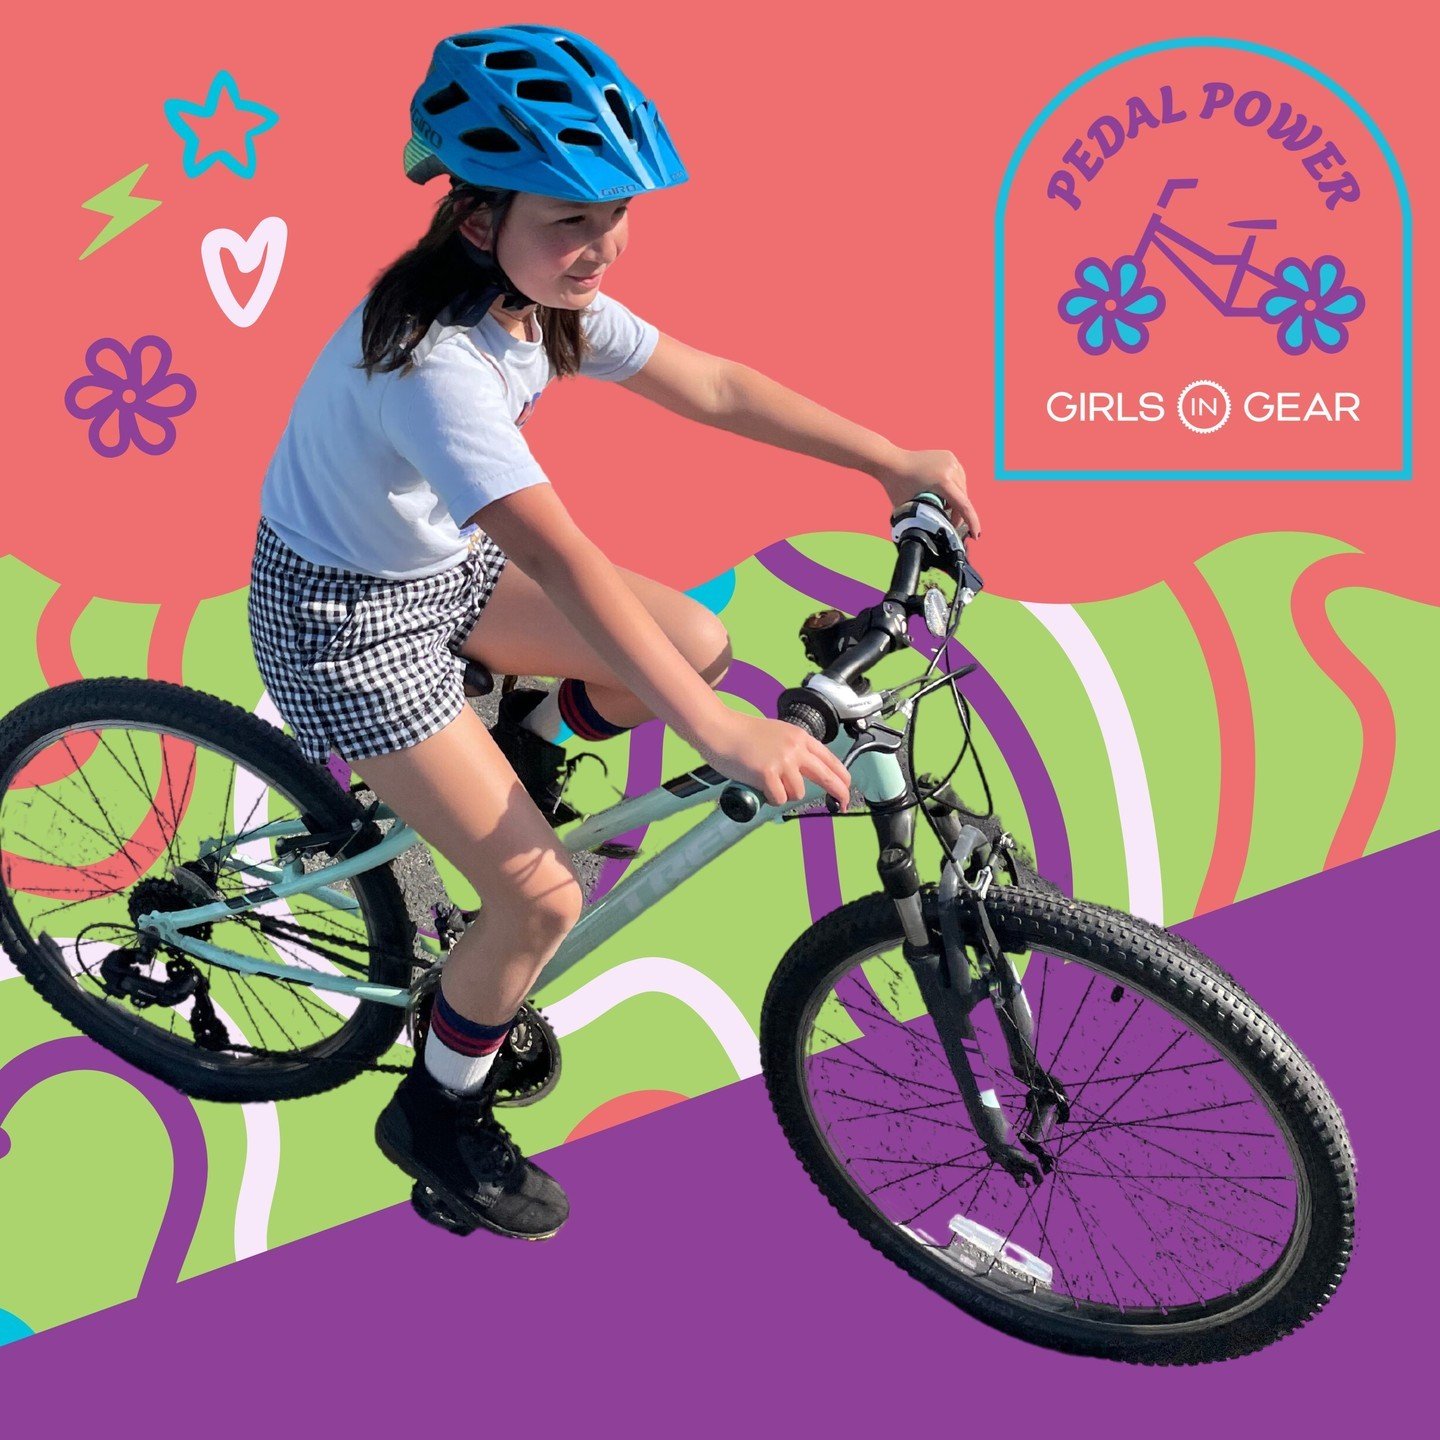 This bike month, pedal for a purpose. 🚲 Support our Pedal Power campaign and help more girls gain confidence and determination that extends far beyond the bike. Donate at girlsingear.org/pedalpower!